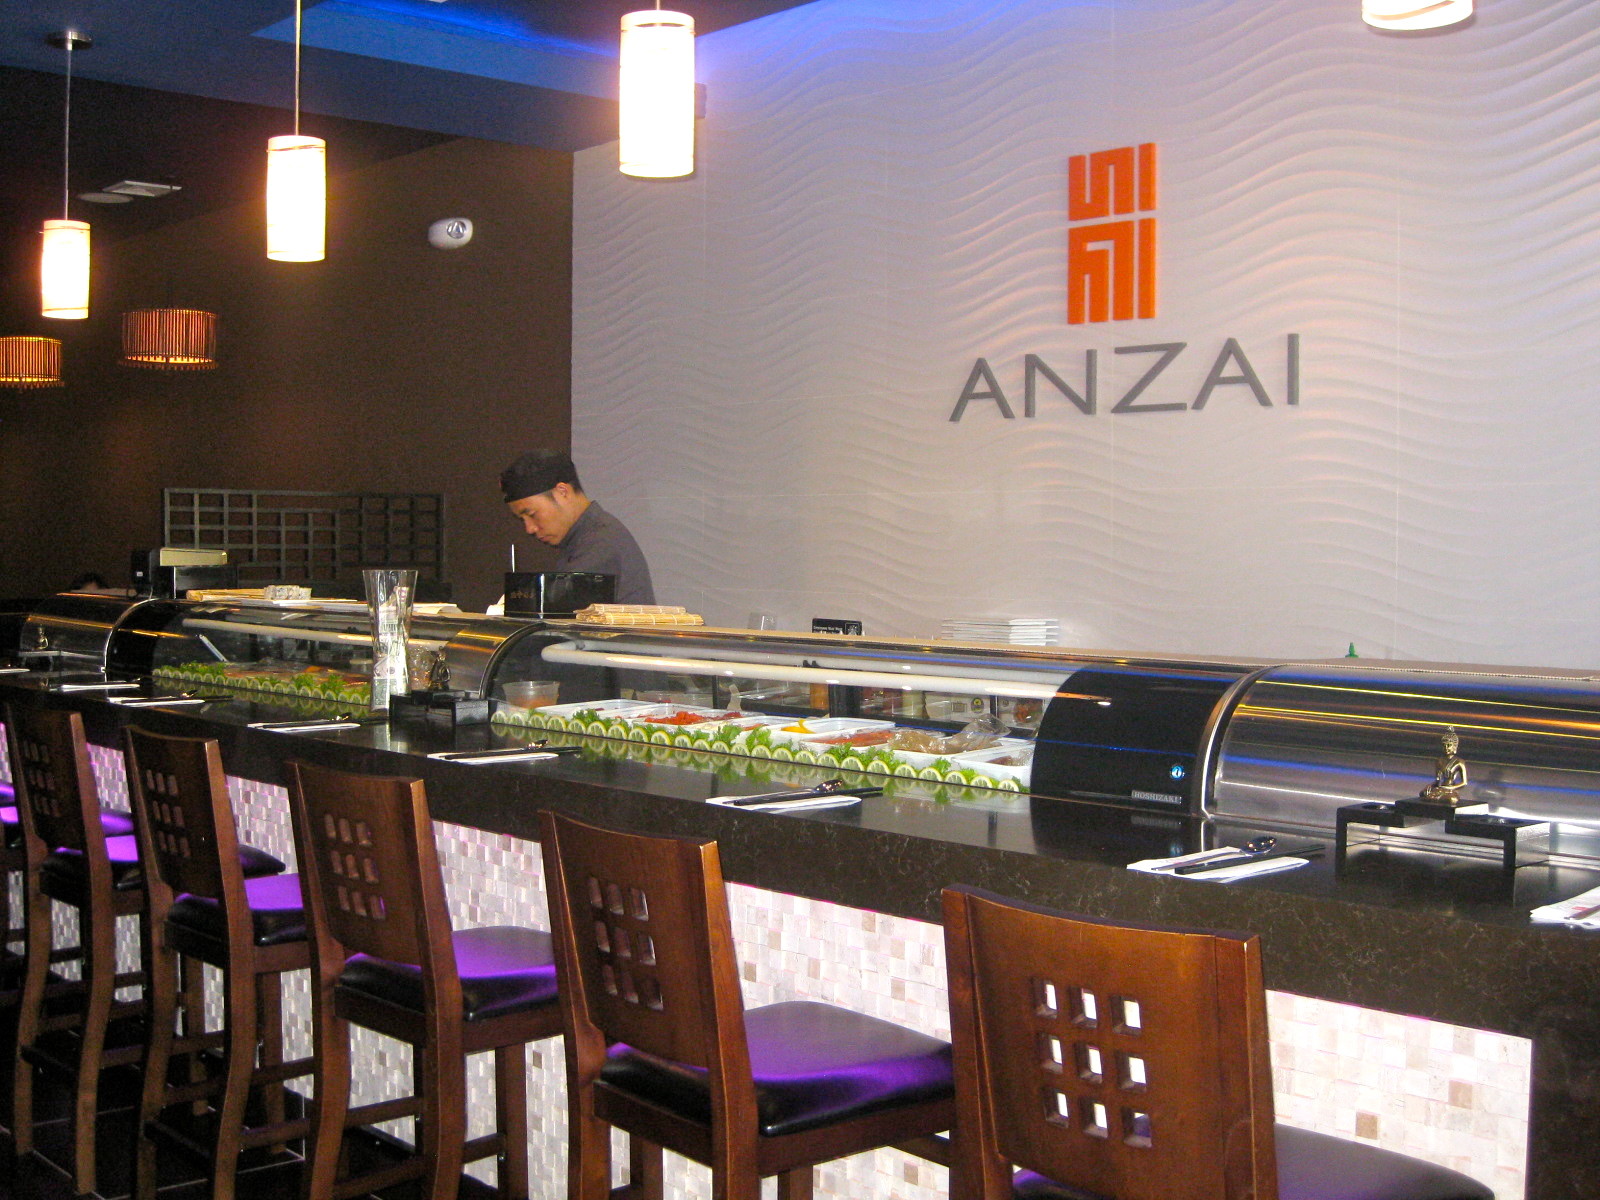 Anzai, on 1856 Front St., offers unique rolls and a soothing ambiance. It opened on July 22.